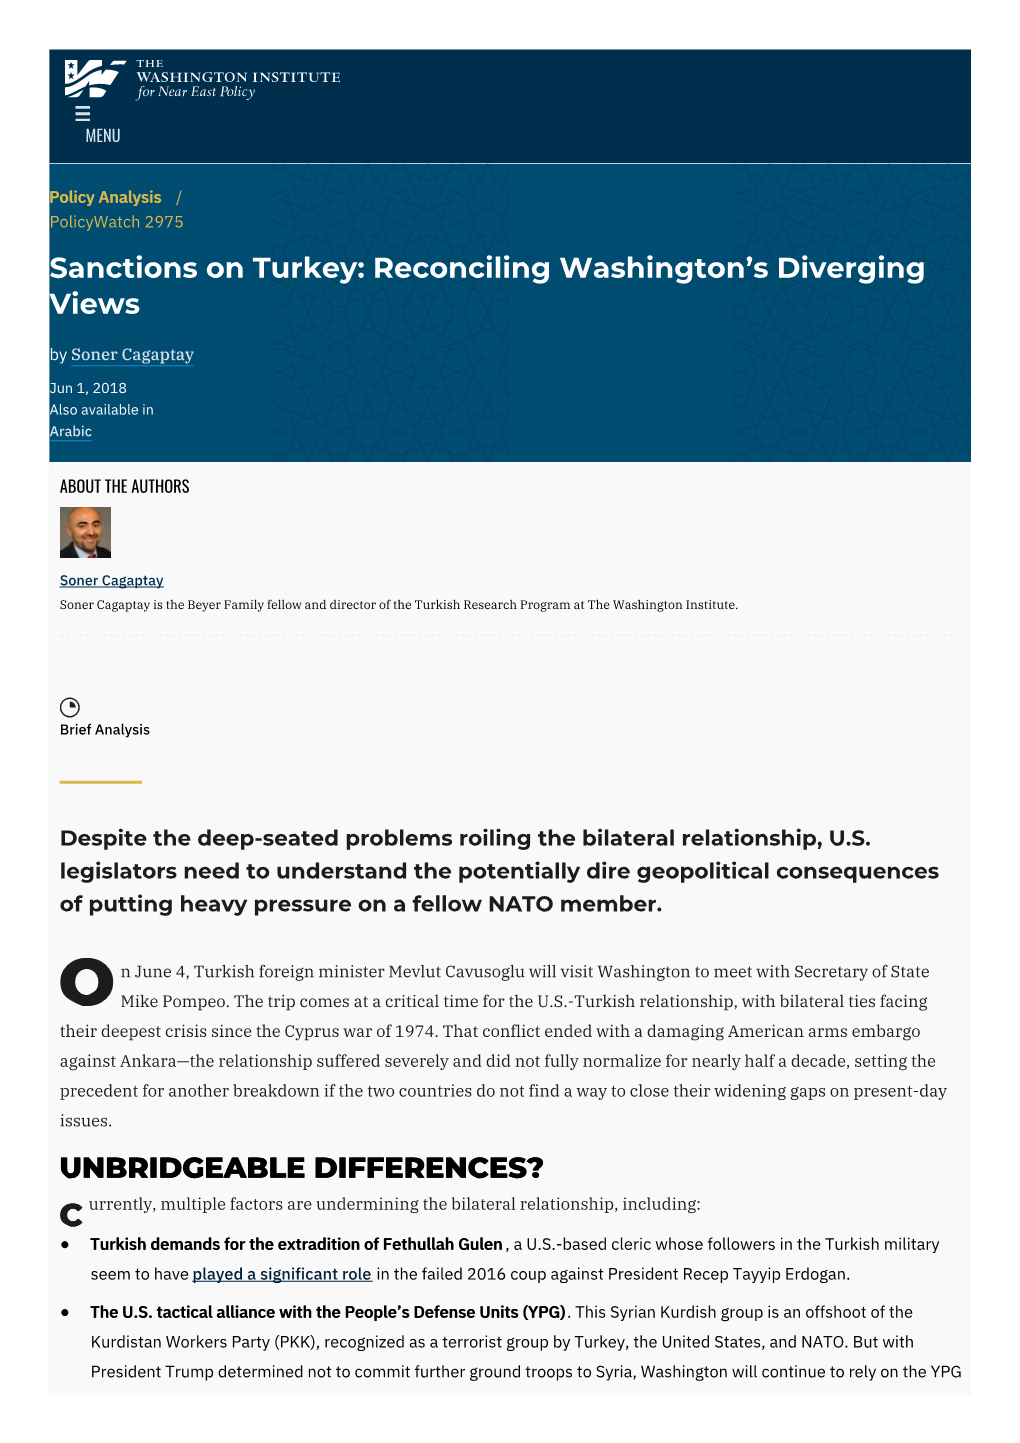 Sanctions on Turkey: Reconciling Washington’S Diverging Views by Soner Cagaptay